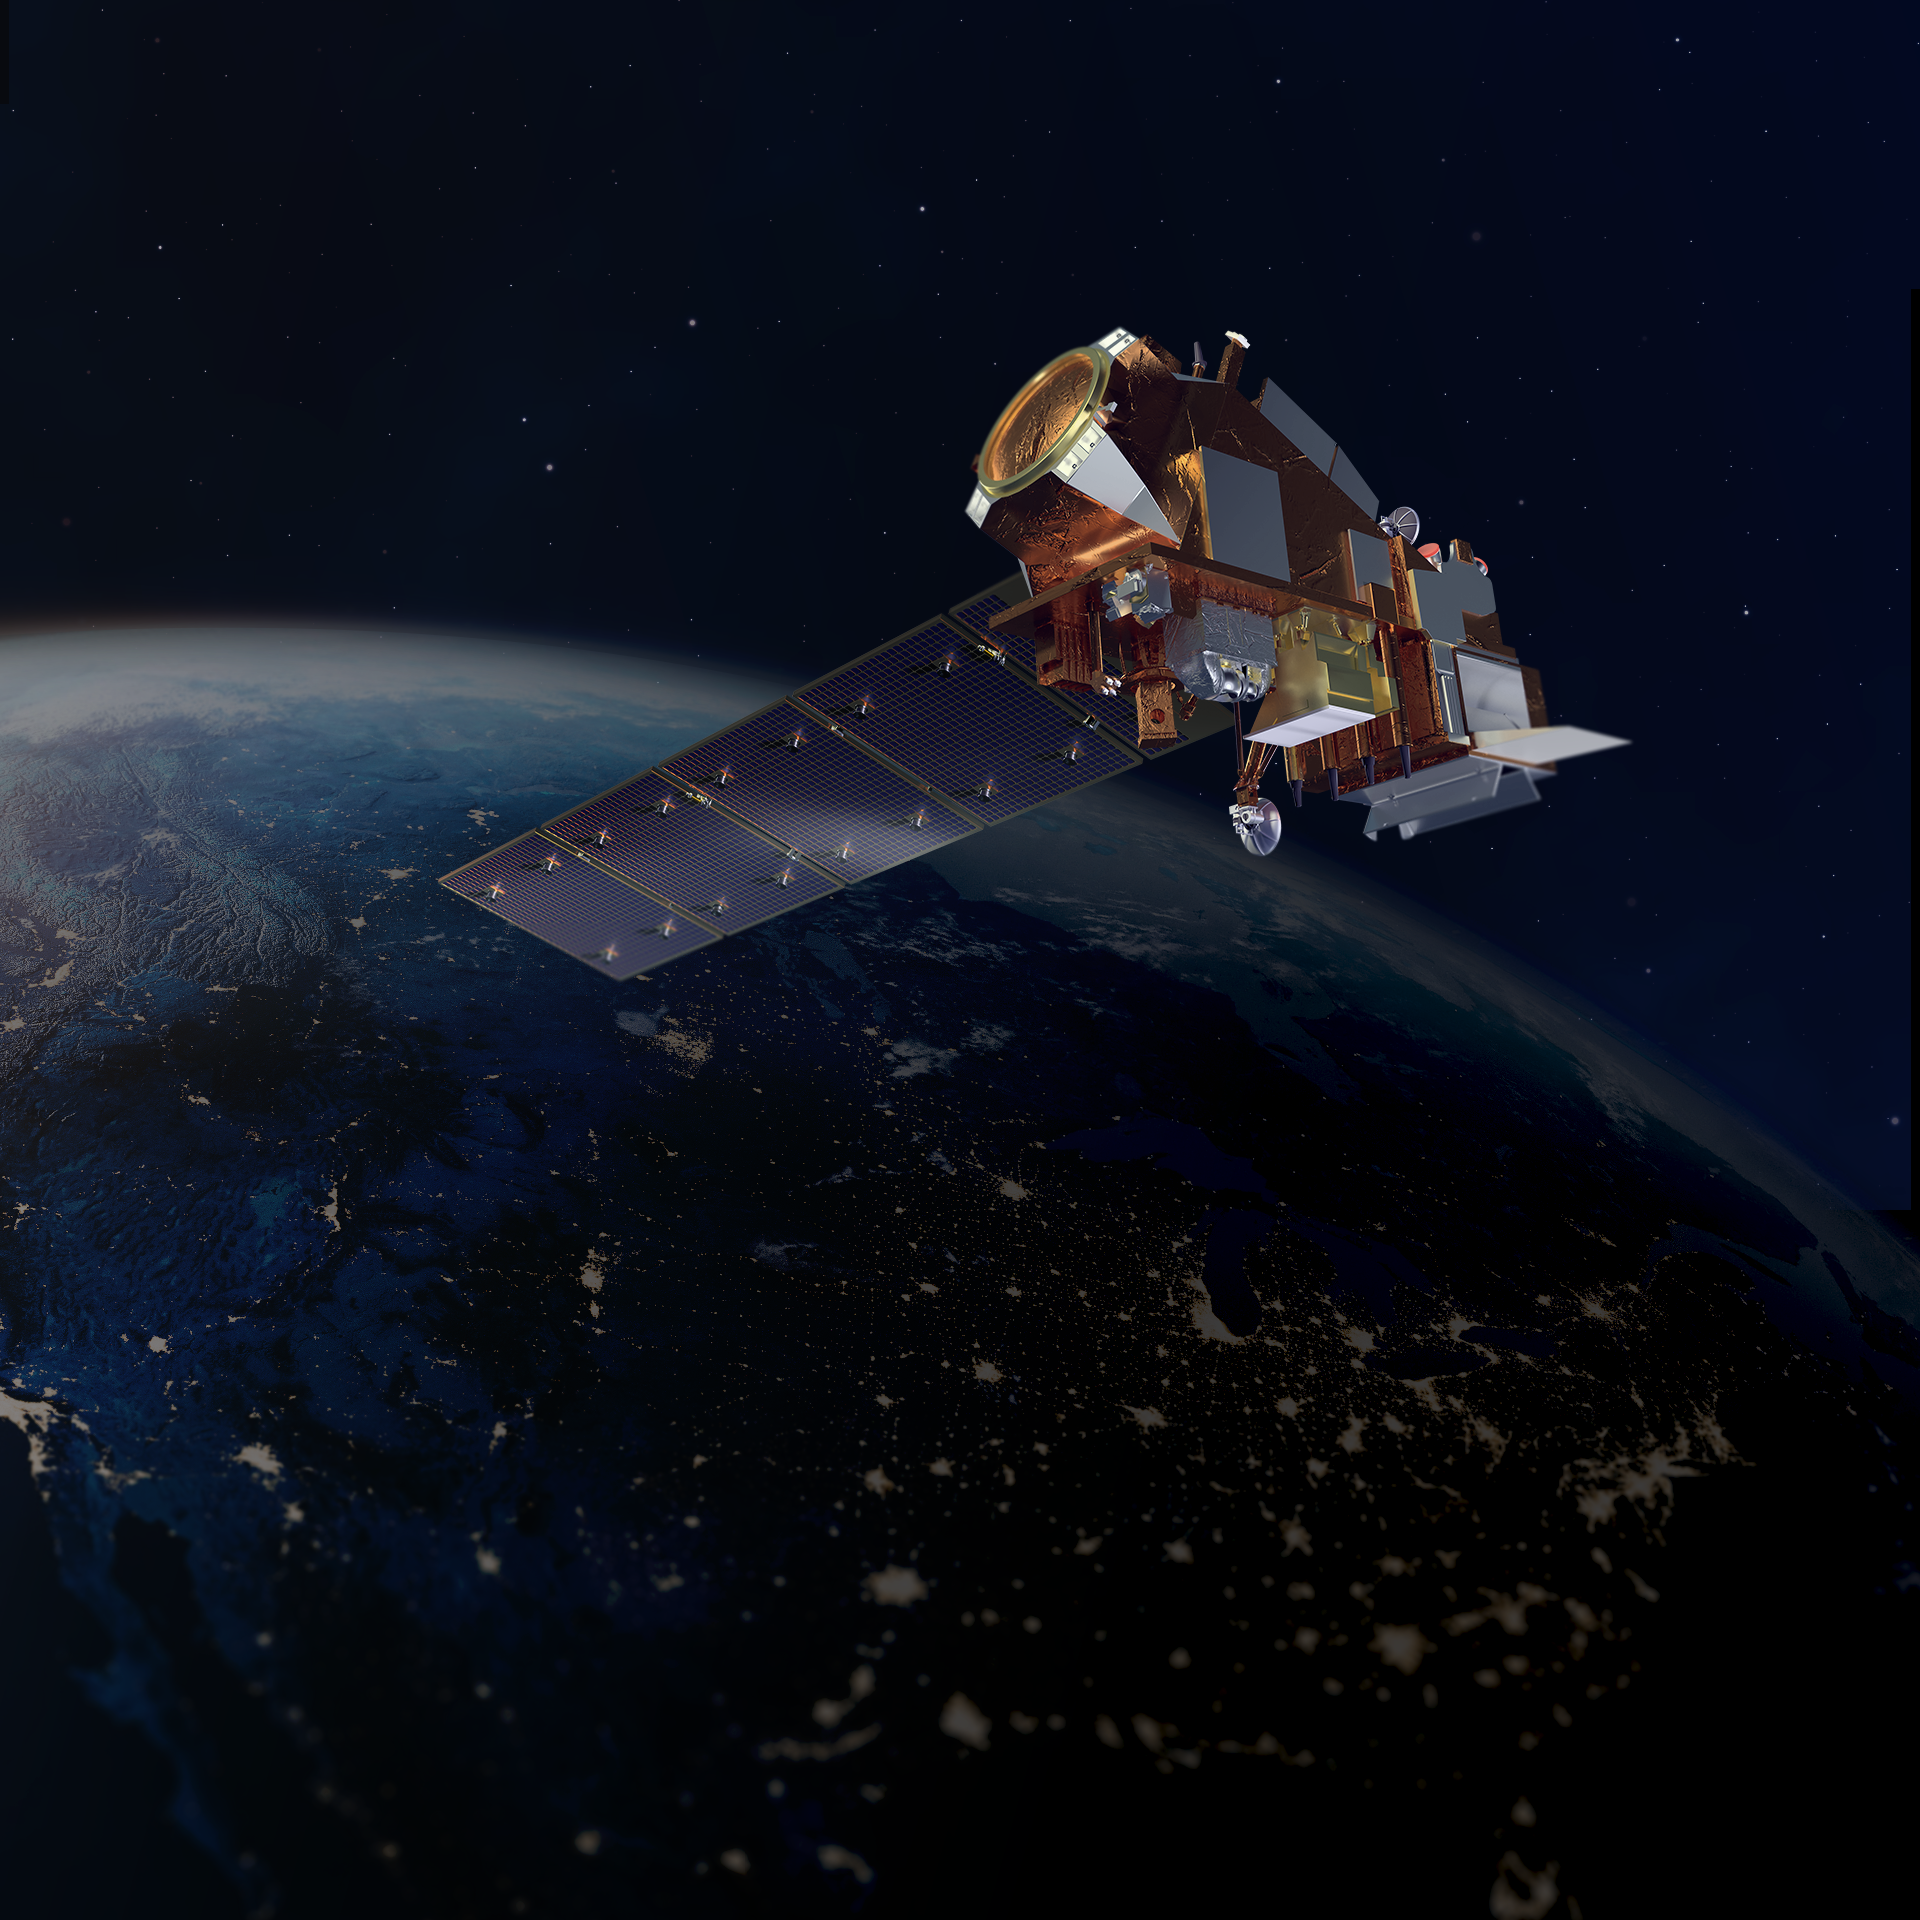 An artist's rendering of the JPSS-2 satellite, which will be renamed NOAA-21 once in orbit.